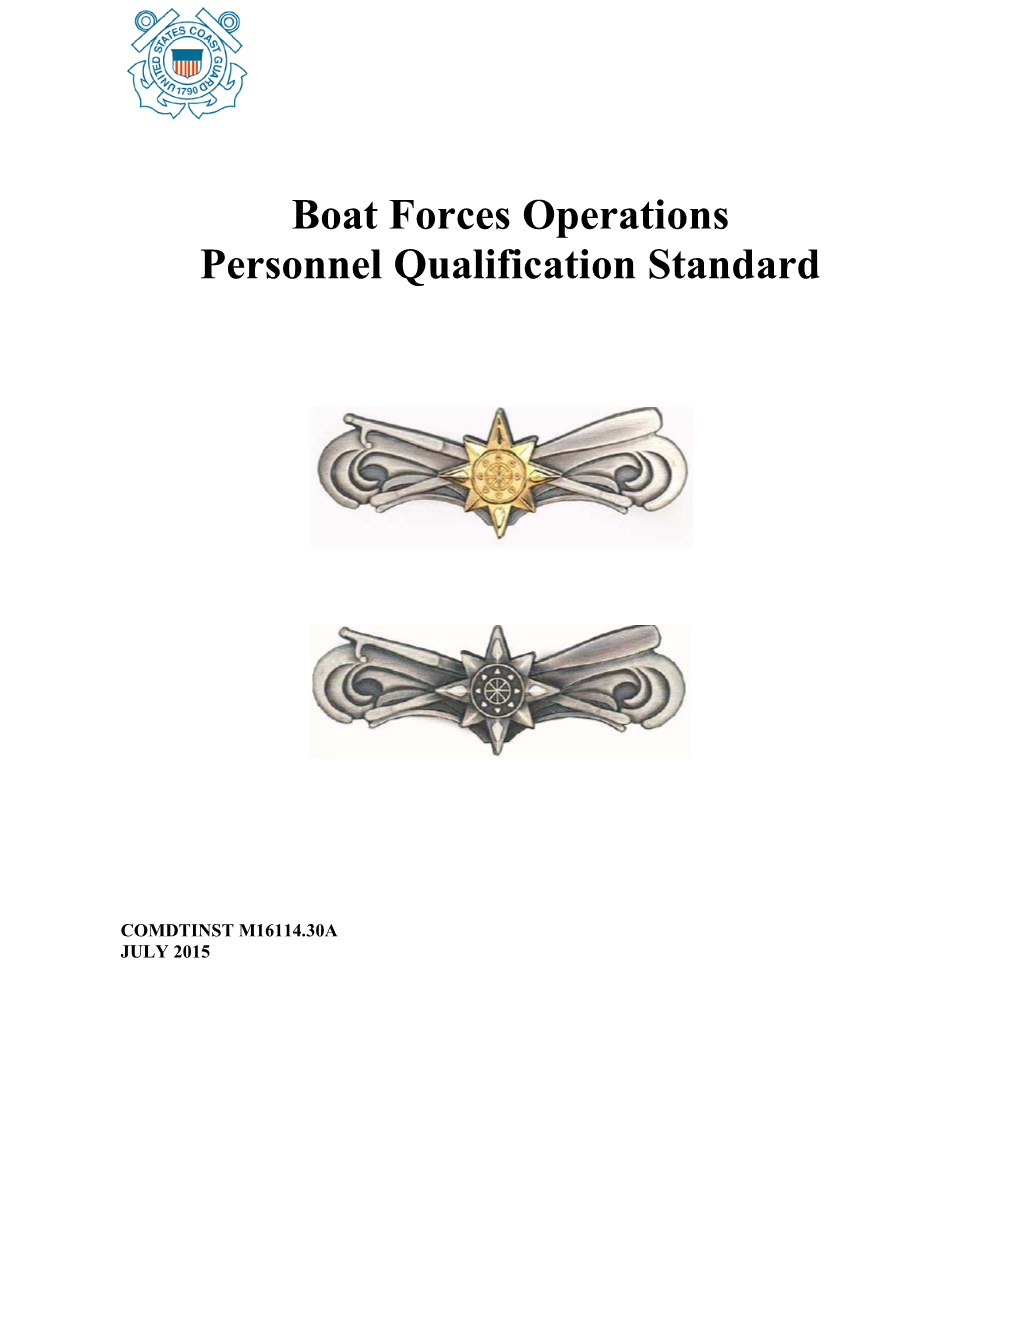 Boat Forces Operations Personnel Qualification Standard